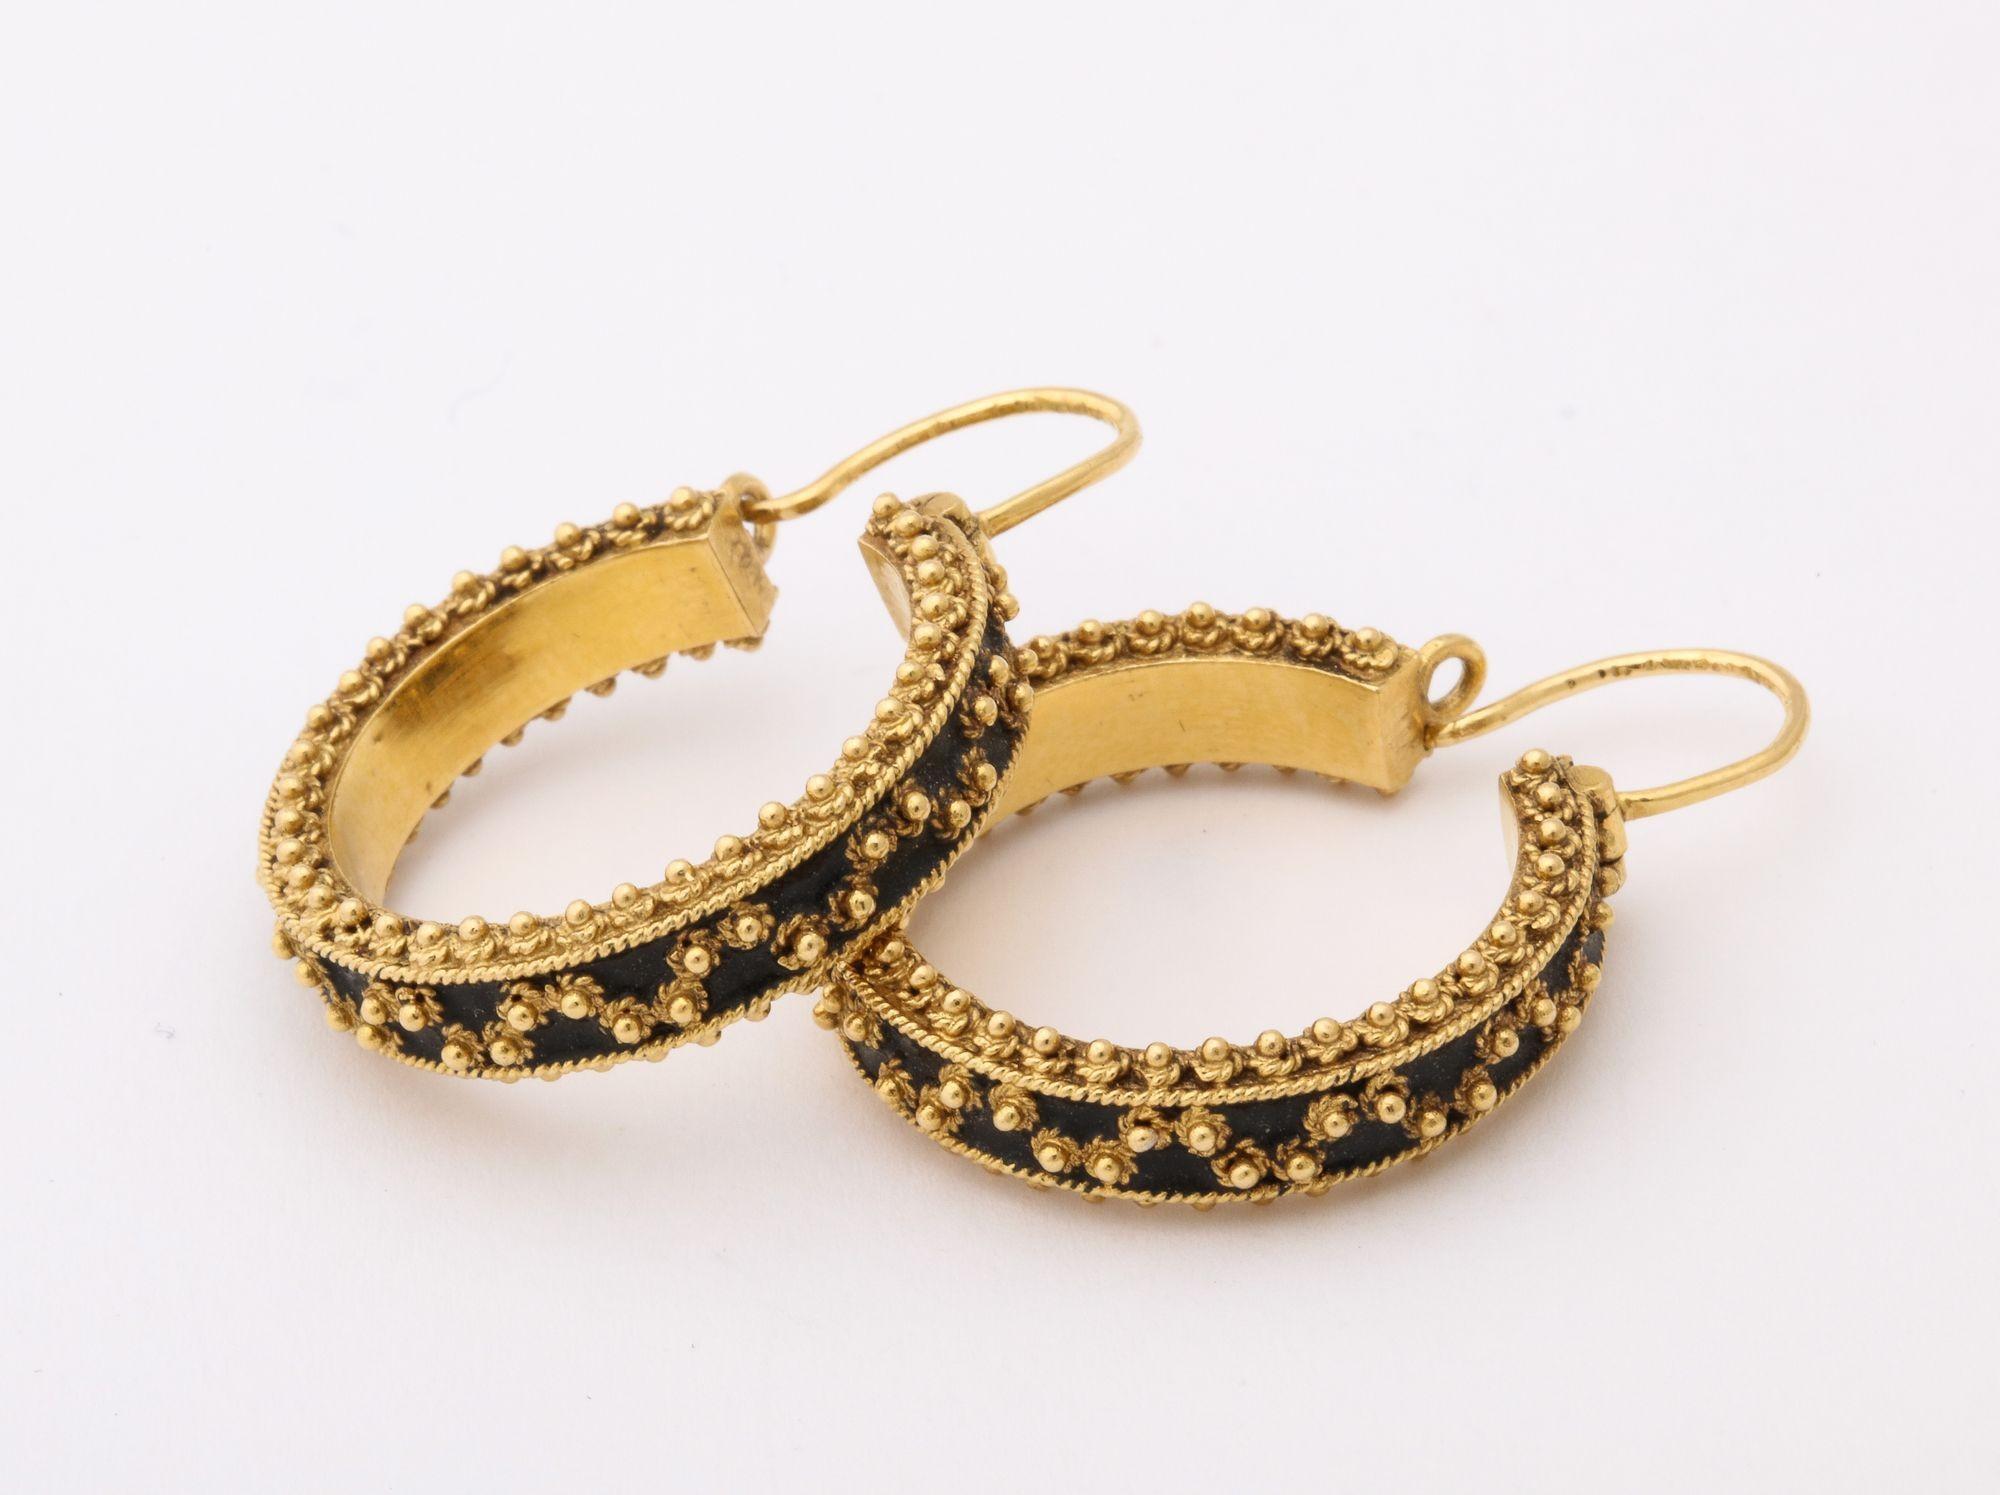 18 k Gold Articulated  Hoop Earrings With Bead Work For Sale 5